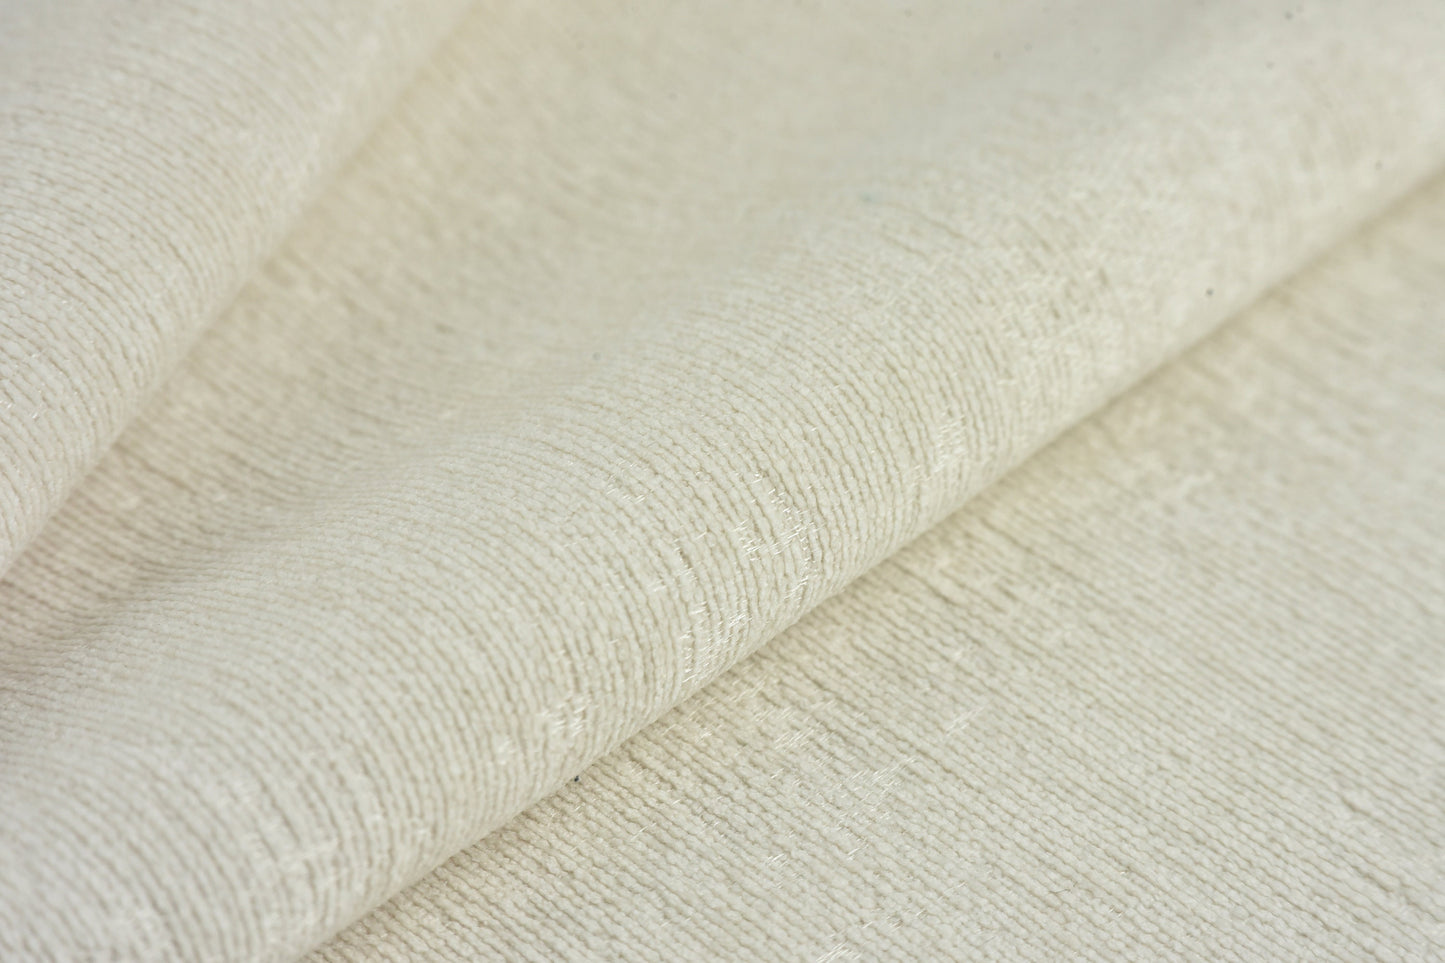 Super Soft Luxury White Modern Textured Upholstery Fabric Curtian Drapery Fabric Furniture Fabric By The Yard